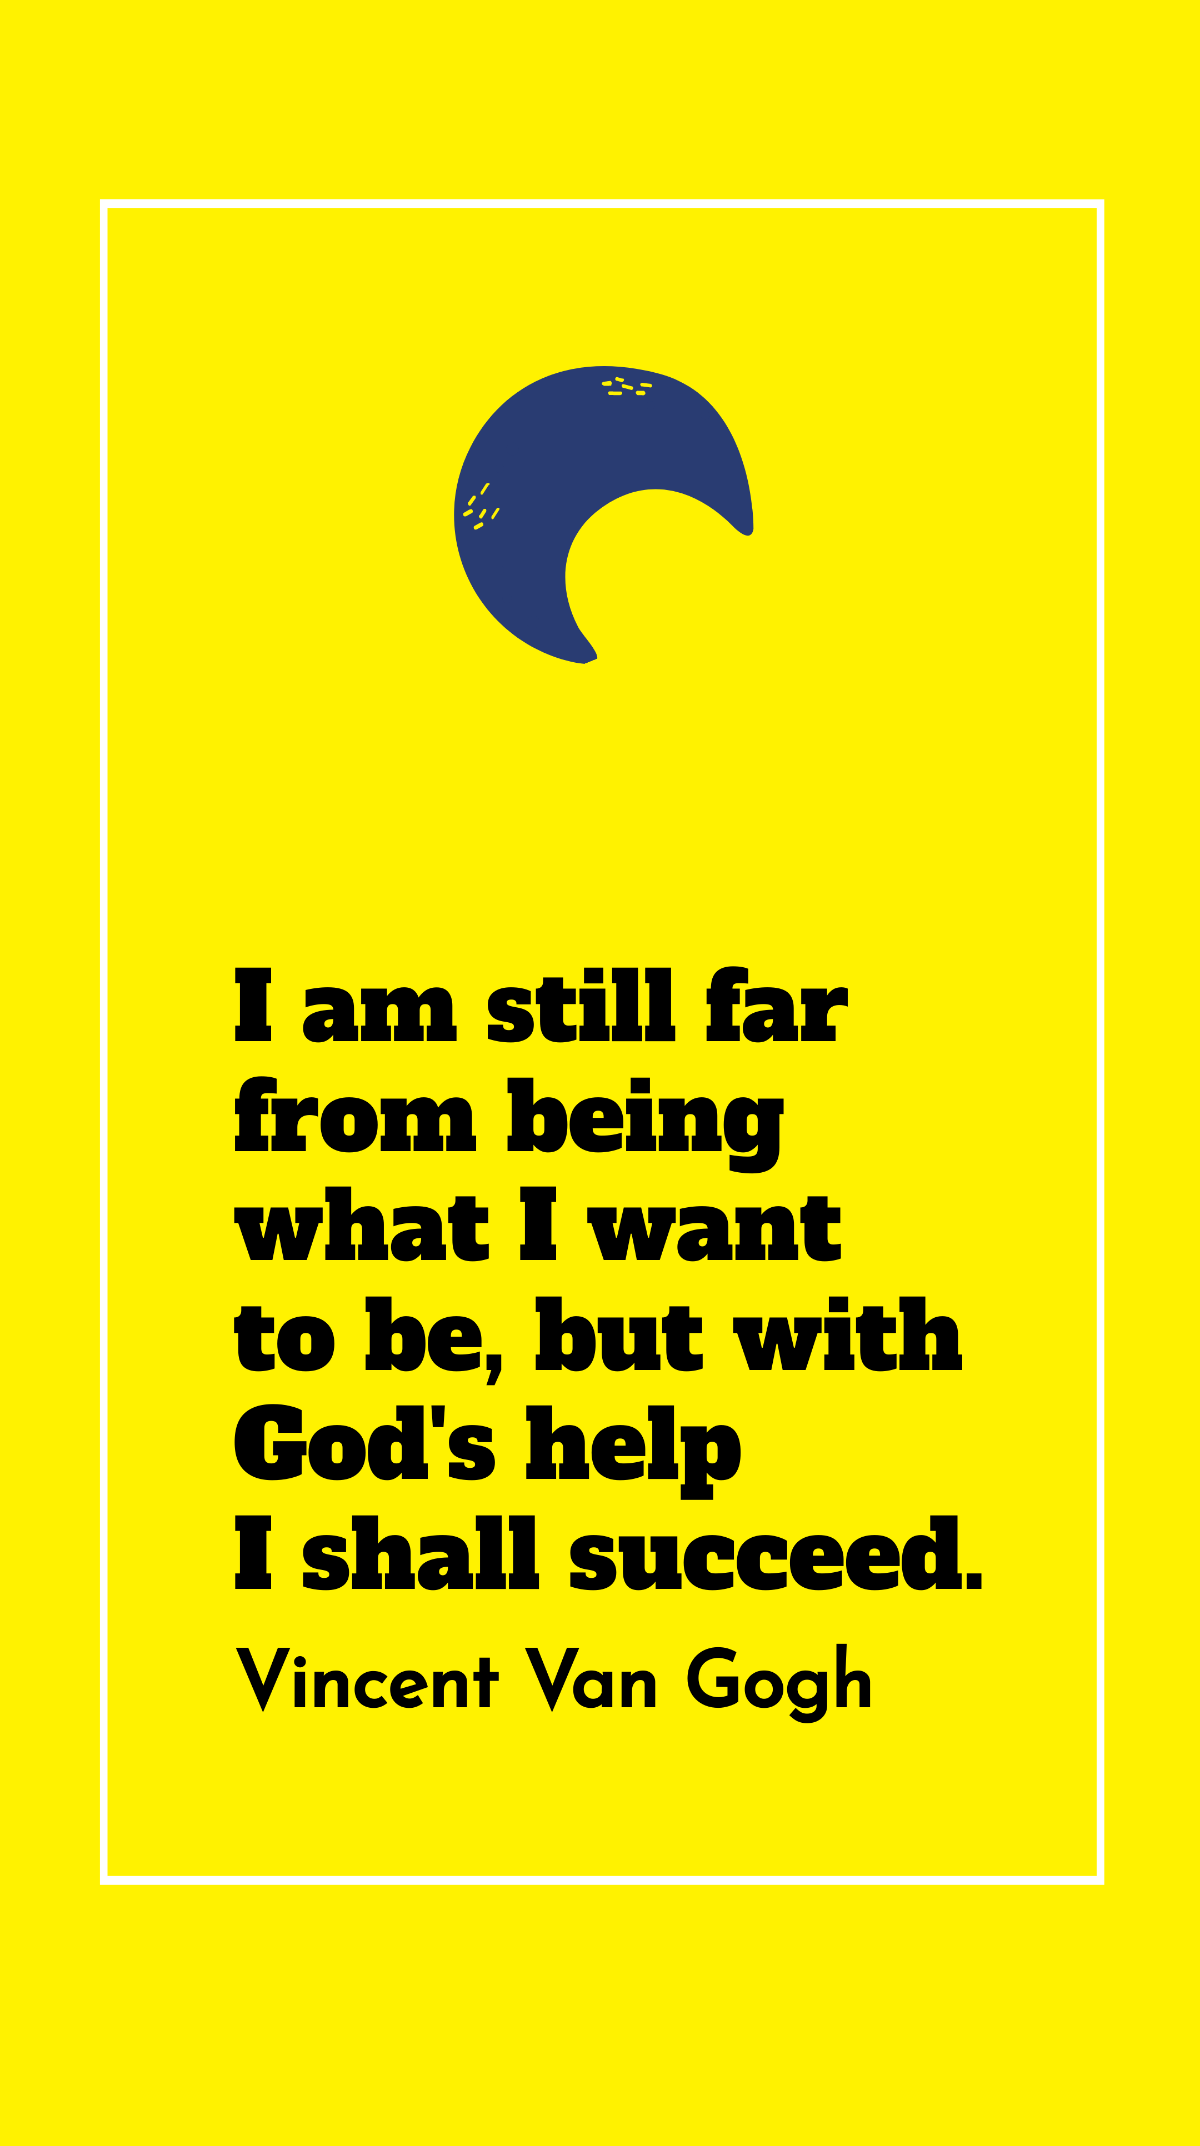 Vincent Van Gogh - I am still far from being what I want to be, but with God's help I shall succeed. Template